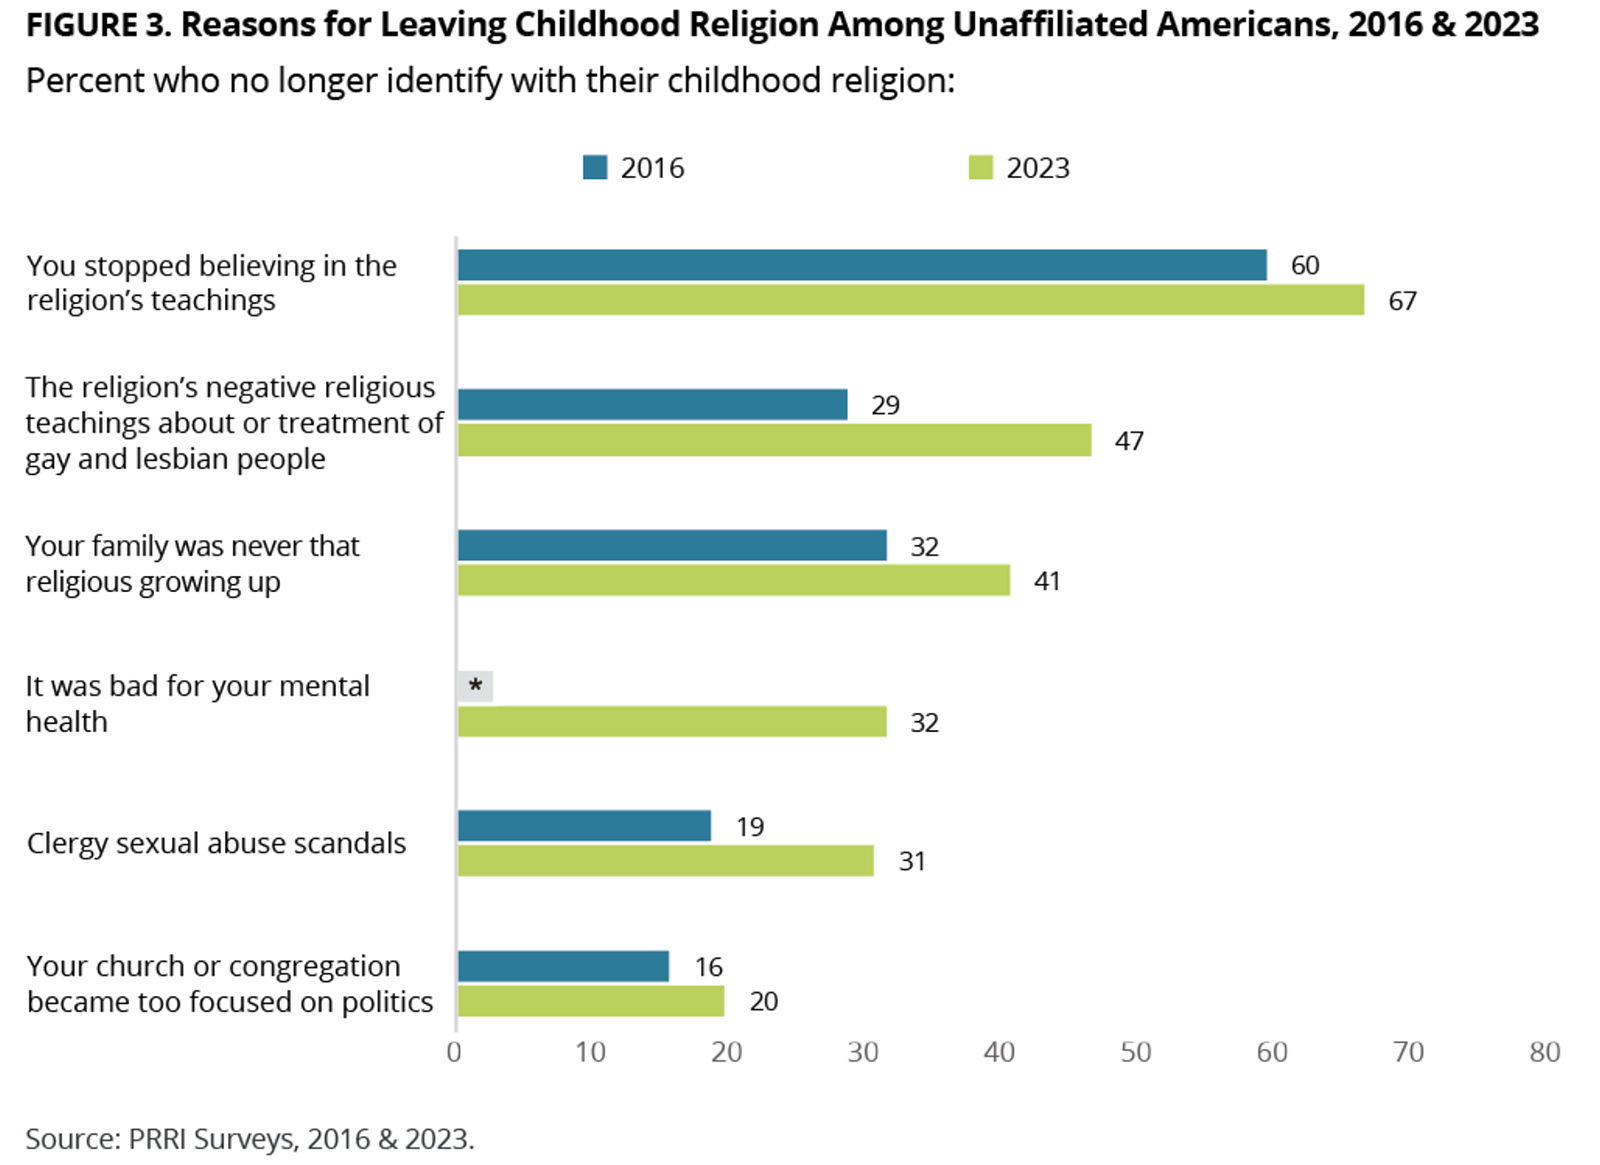 "Reasons for Leaving Childhood Religion Among Unaffiliated Americans, 2016 & 2023" (Graphic courtesy PRRI)